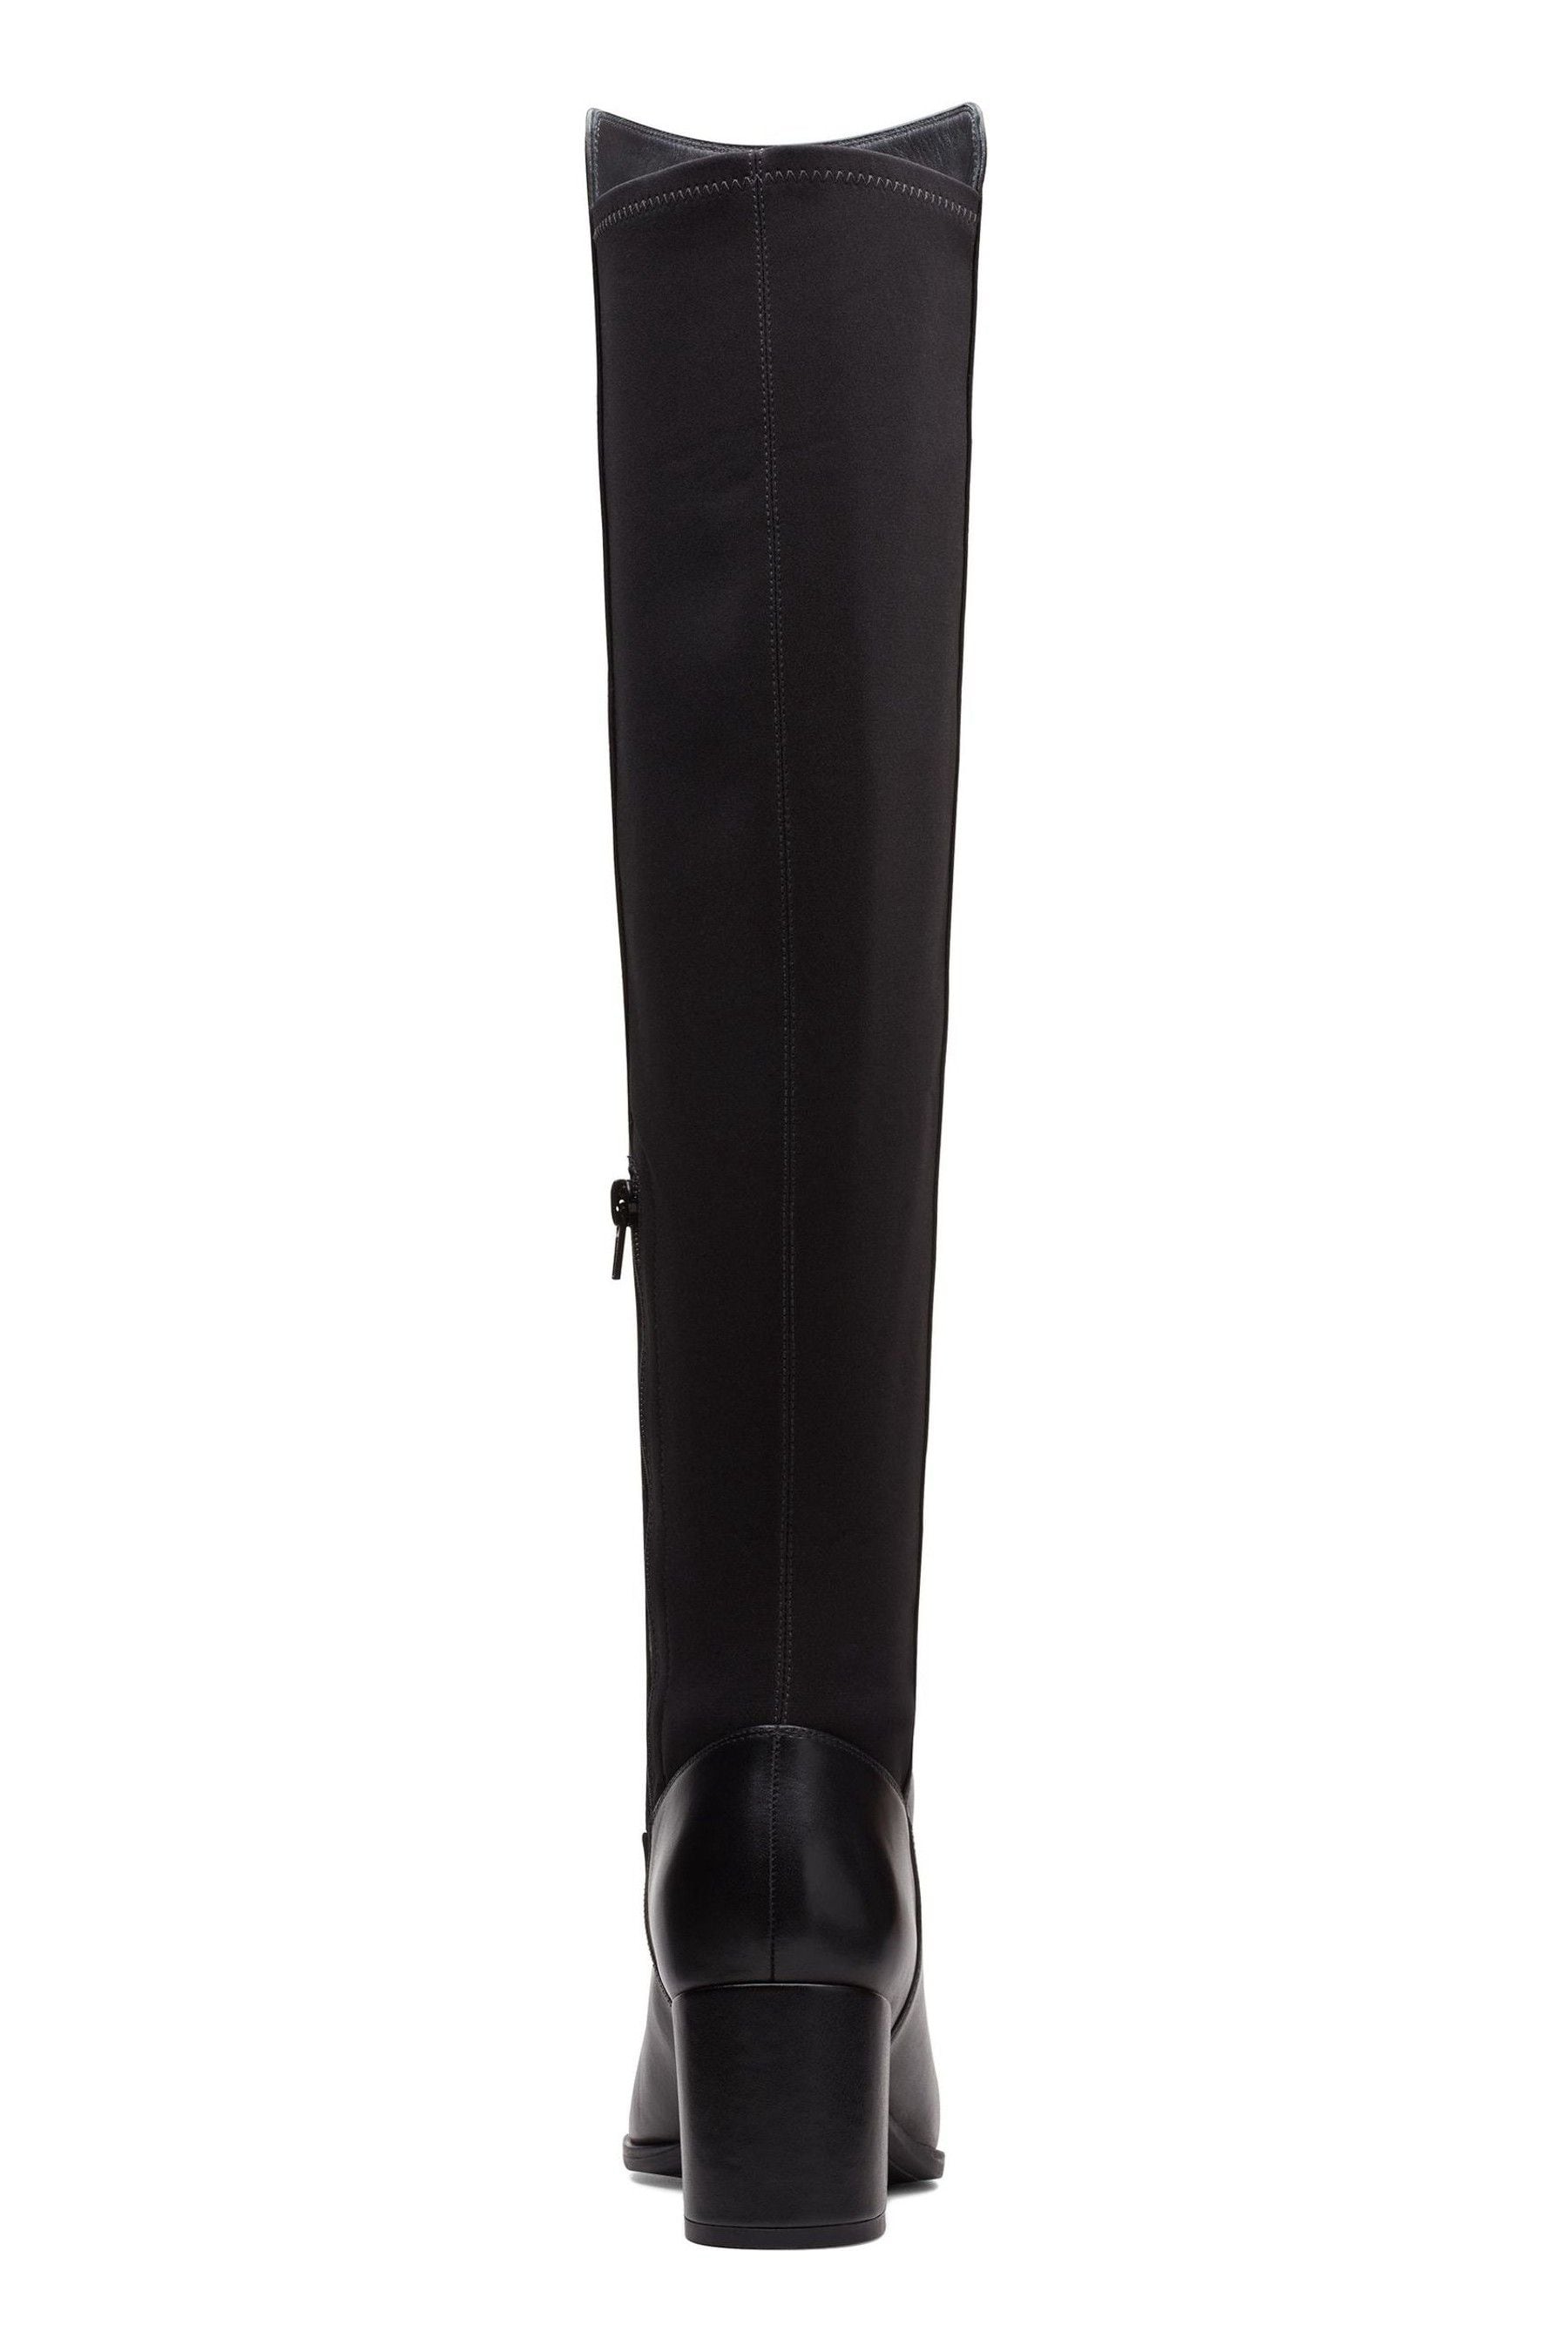 Buy Clarks Black Leather Freva 55 Stretch Boots from the Next UK online ...